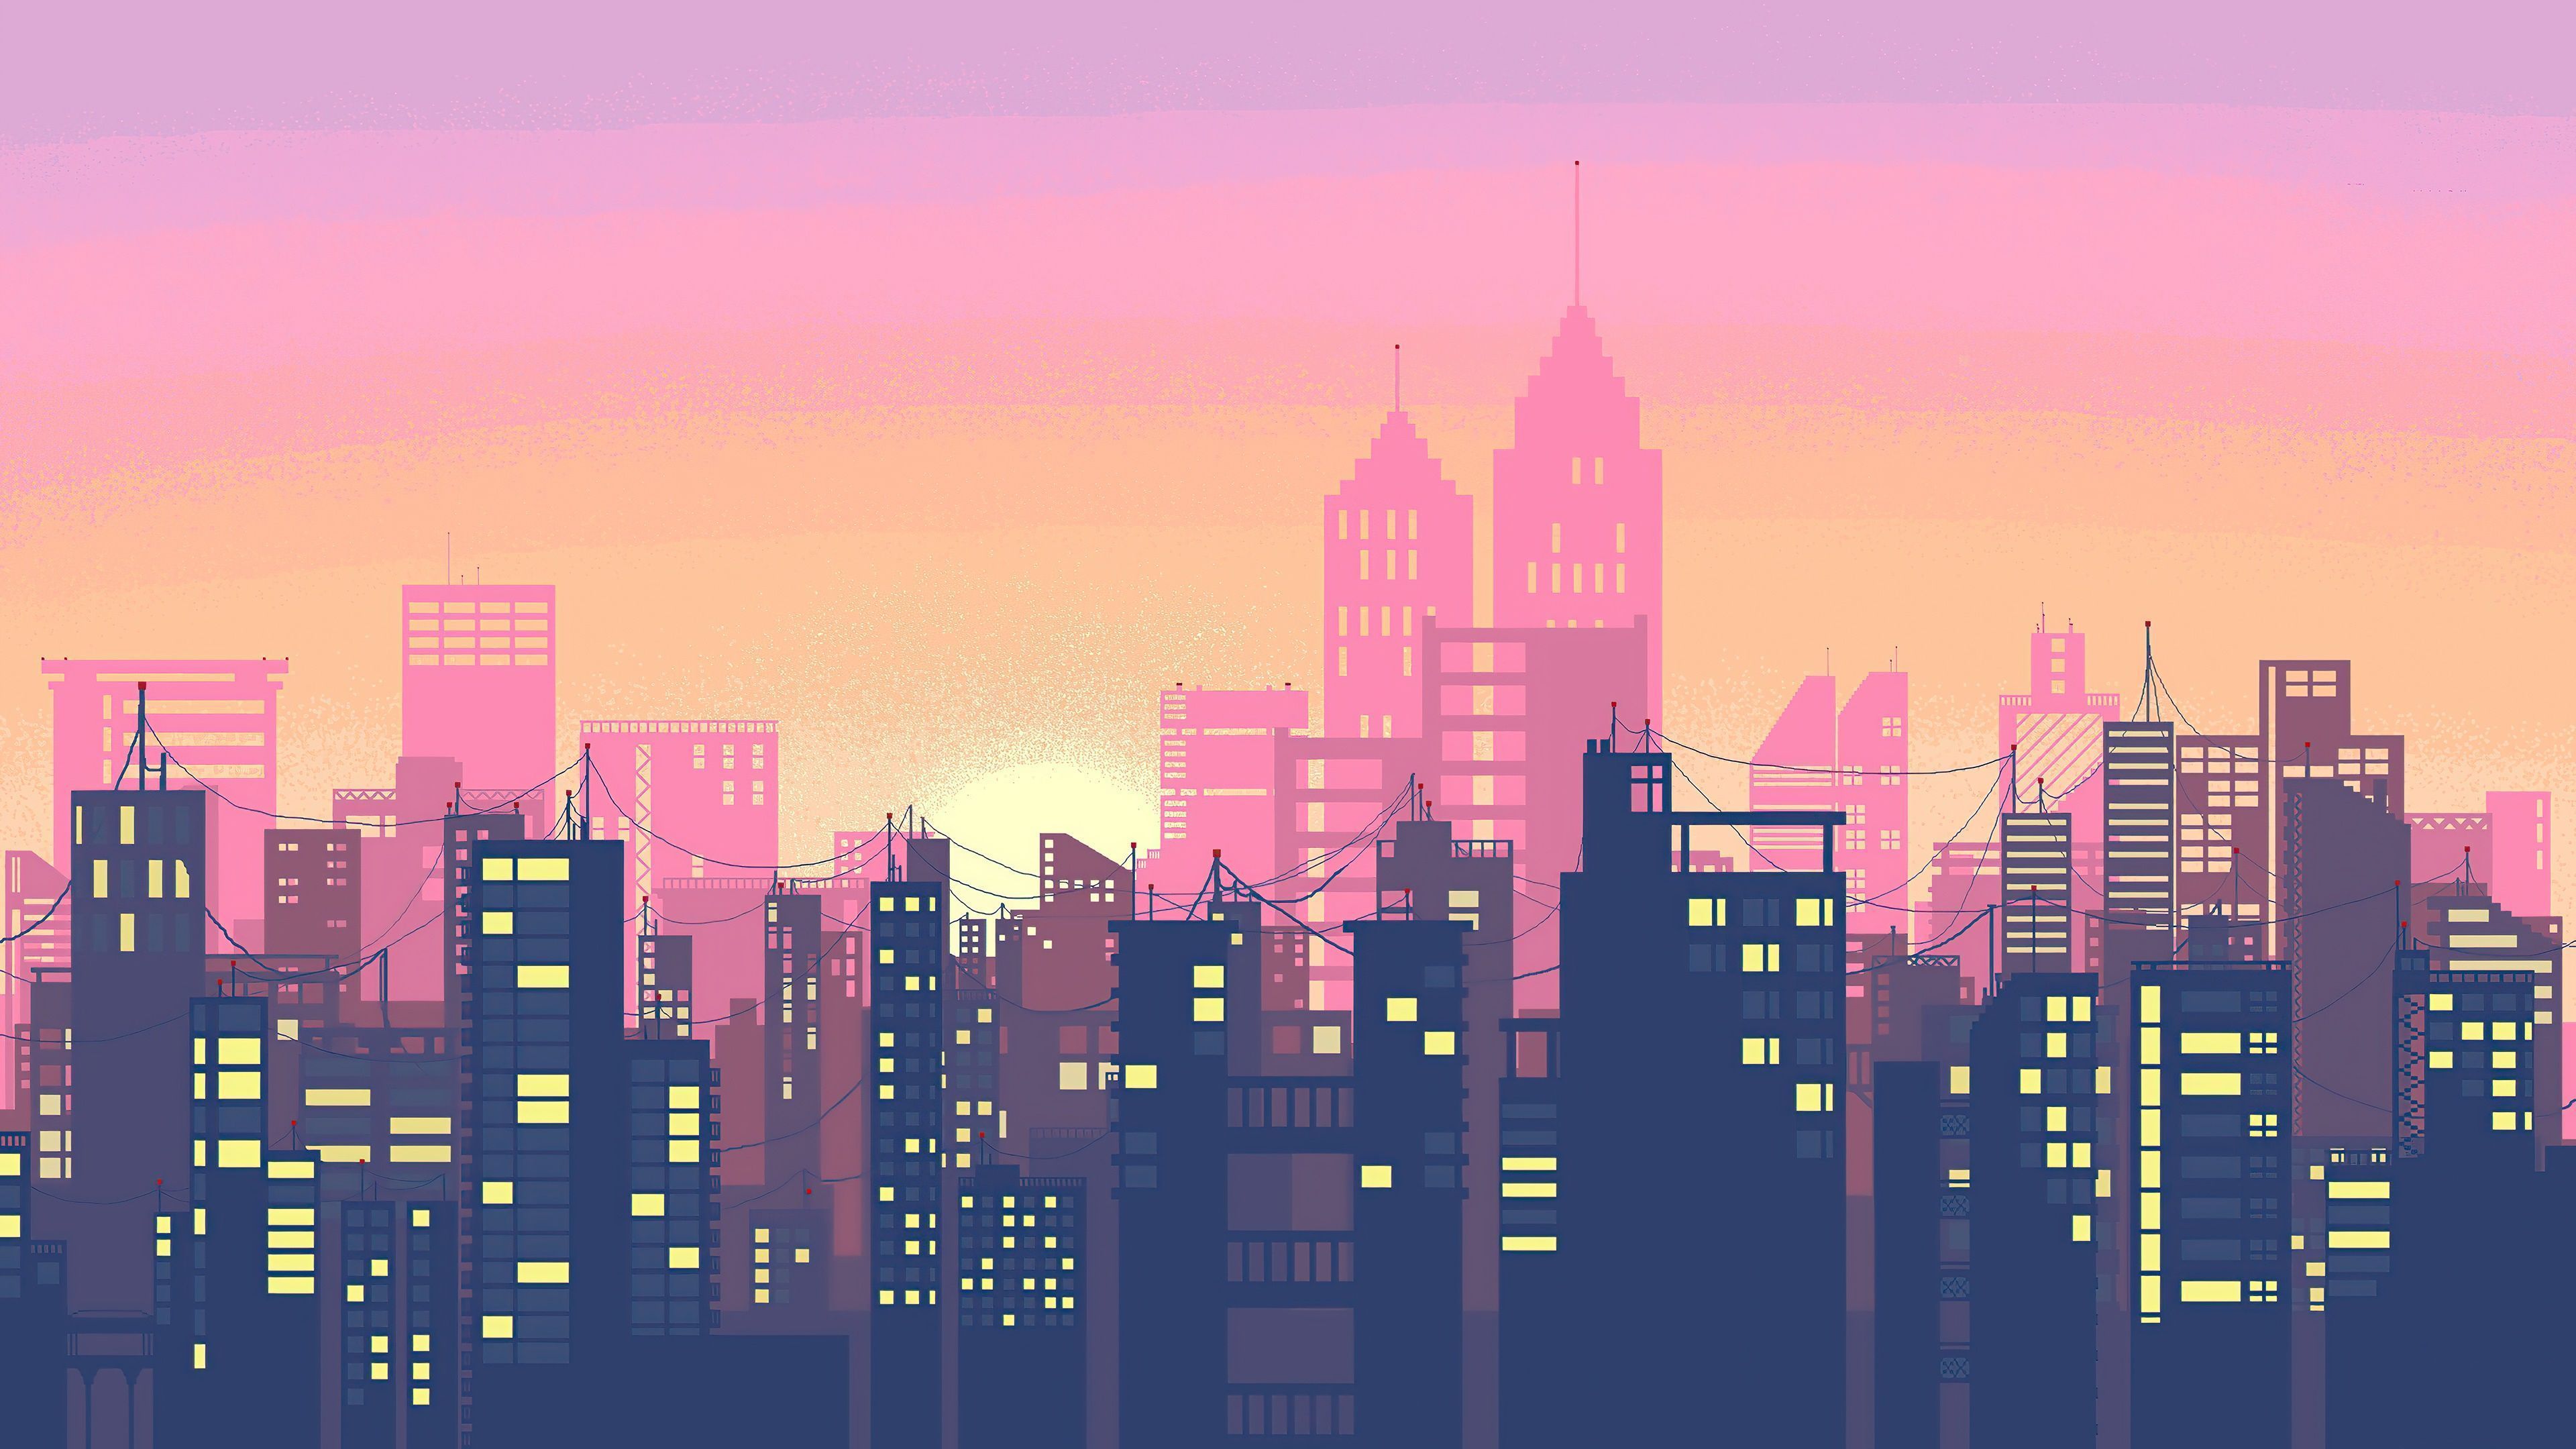 A city skyline at sunset with buildings and lights - Cityscape, skyline